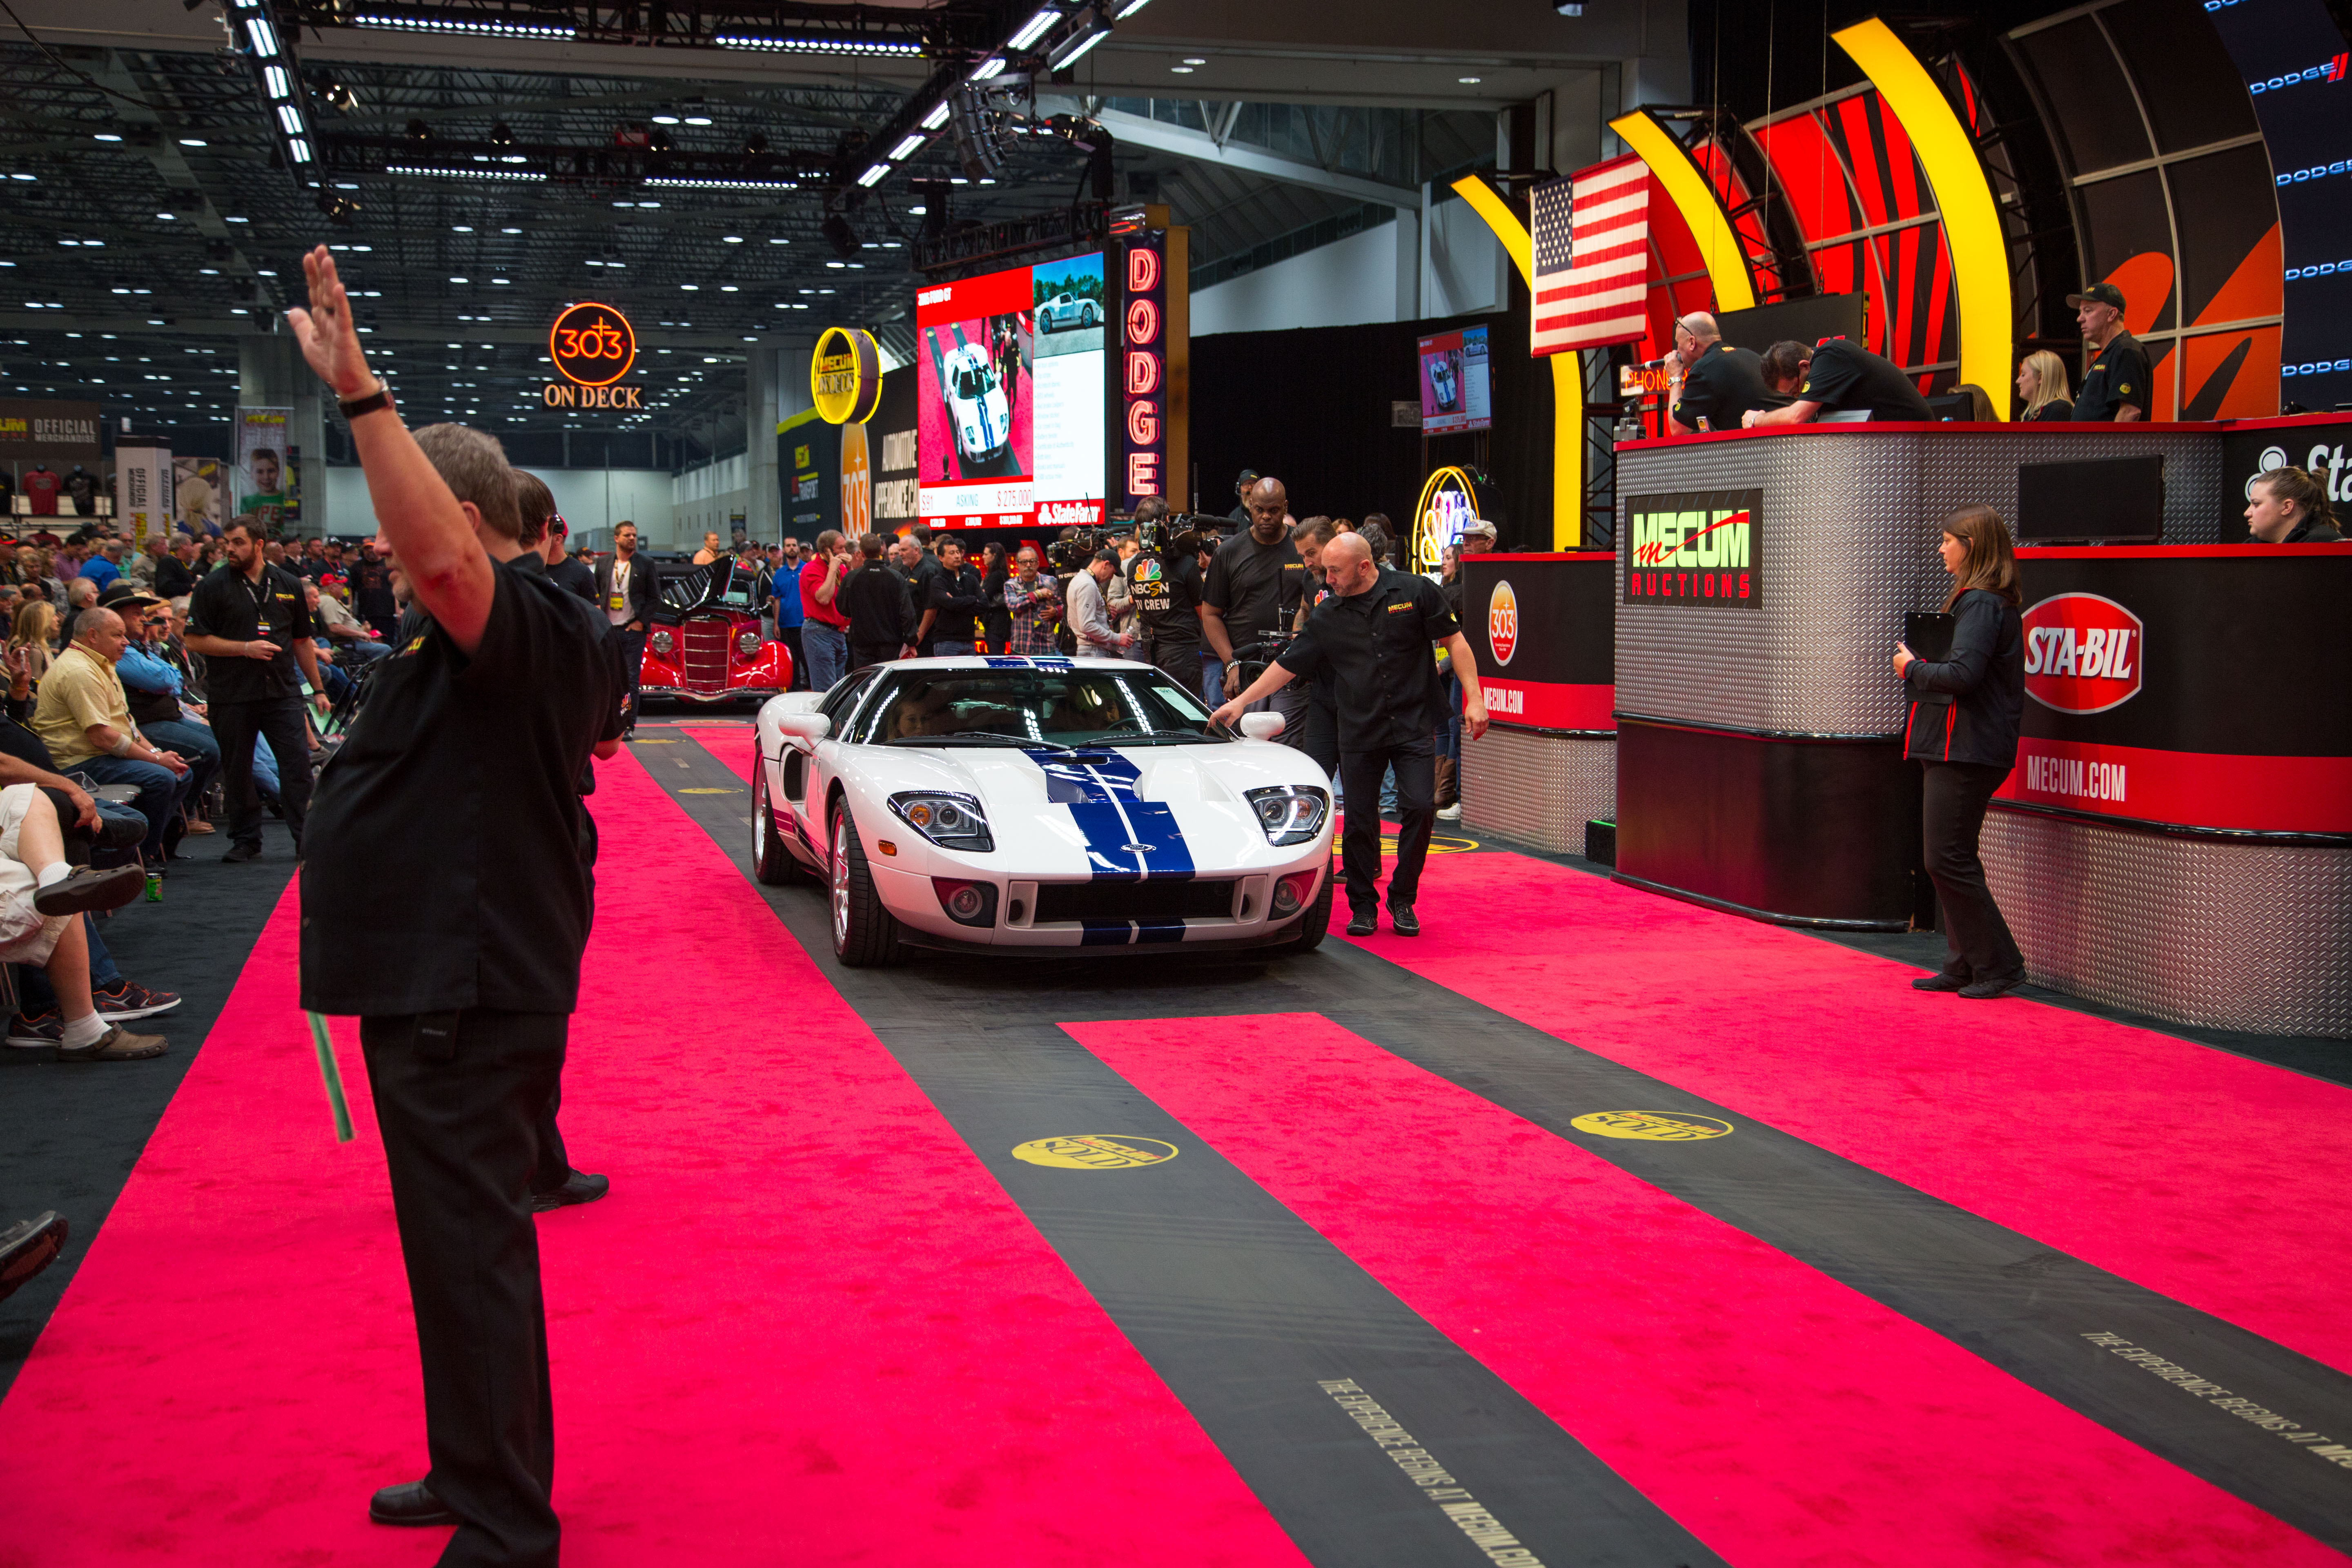 3,600-mile Ford GT leads the way at Mecum’s Kansas City auction